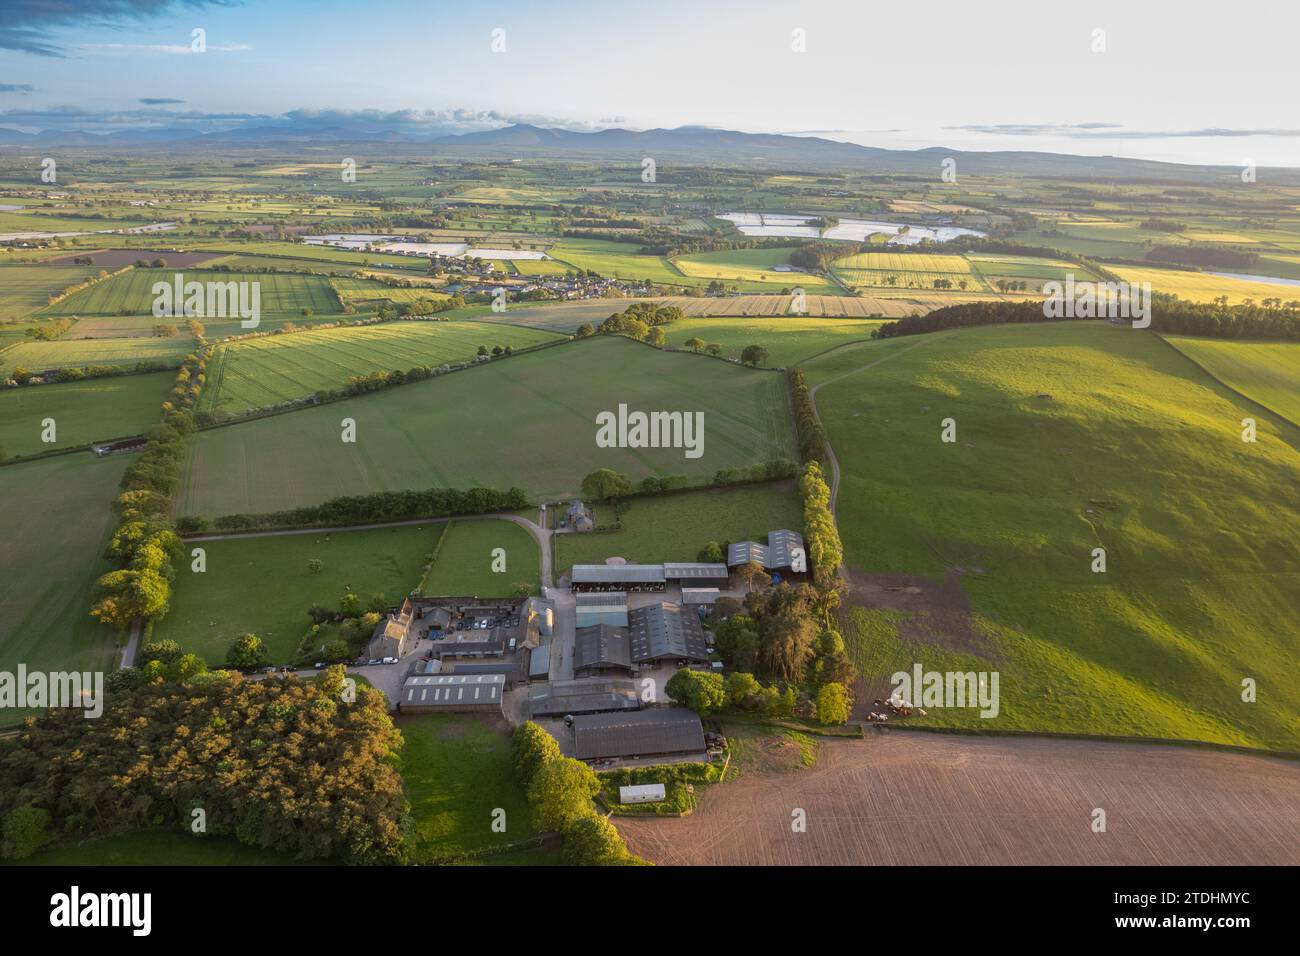 Farmstead in the Eden valley near Carlisle, looking towards the mountains of the Lake District, Cumbria, UK. Stock Photo